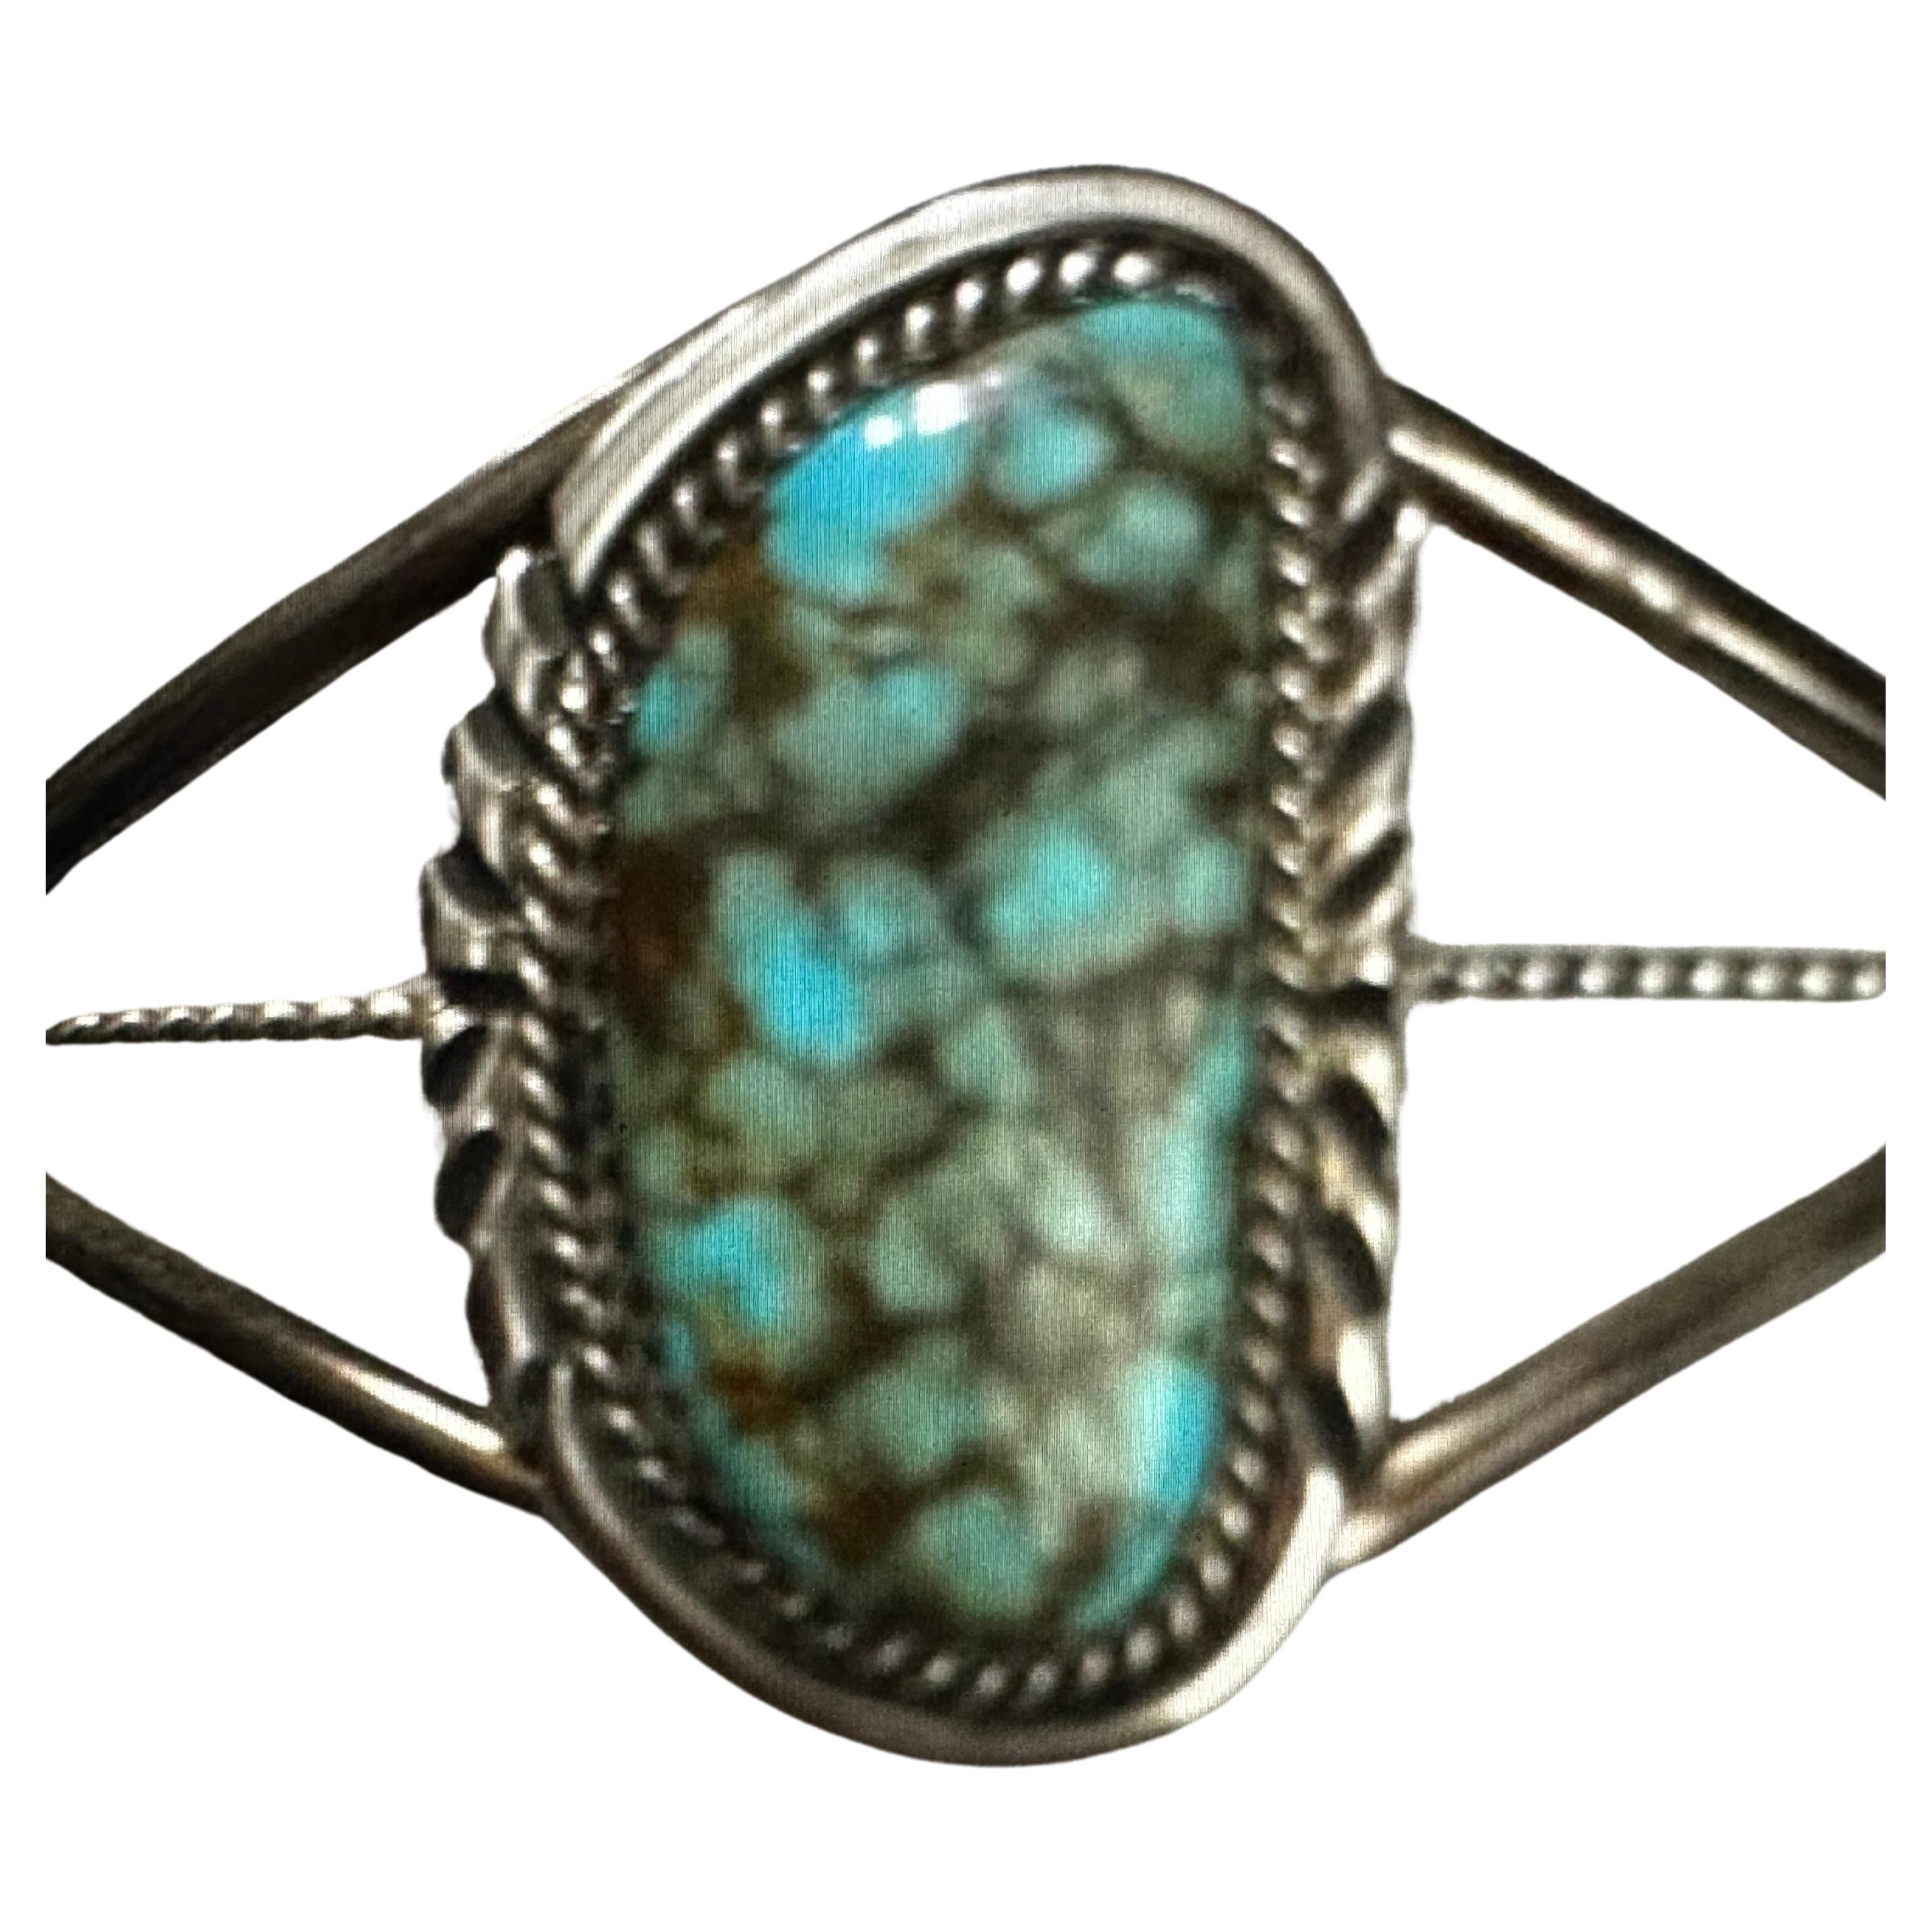 Sterling Silver .925  #8 Turquoise  Cuff Bracelet by Navajo Artist L Spencer
Measures approximately:
2 1/2